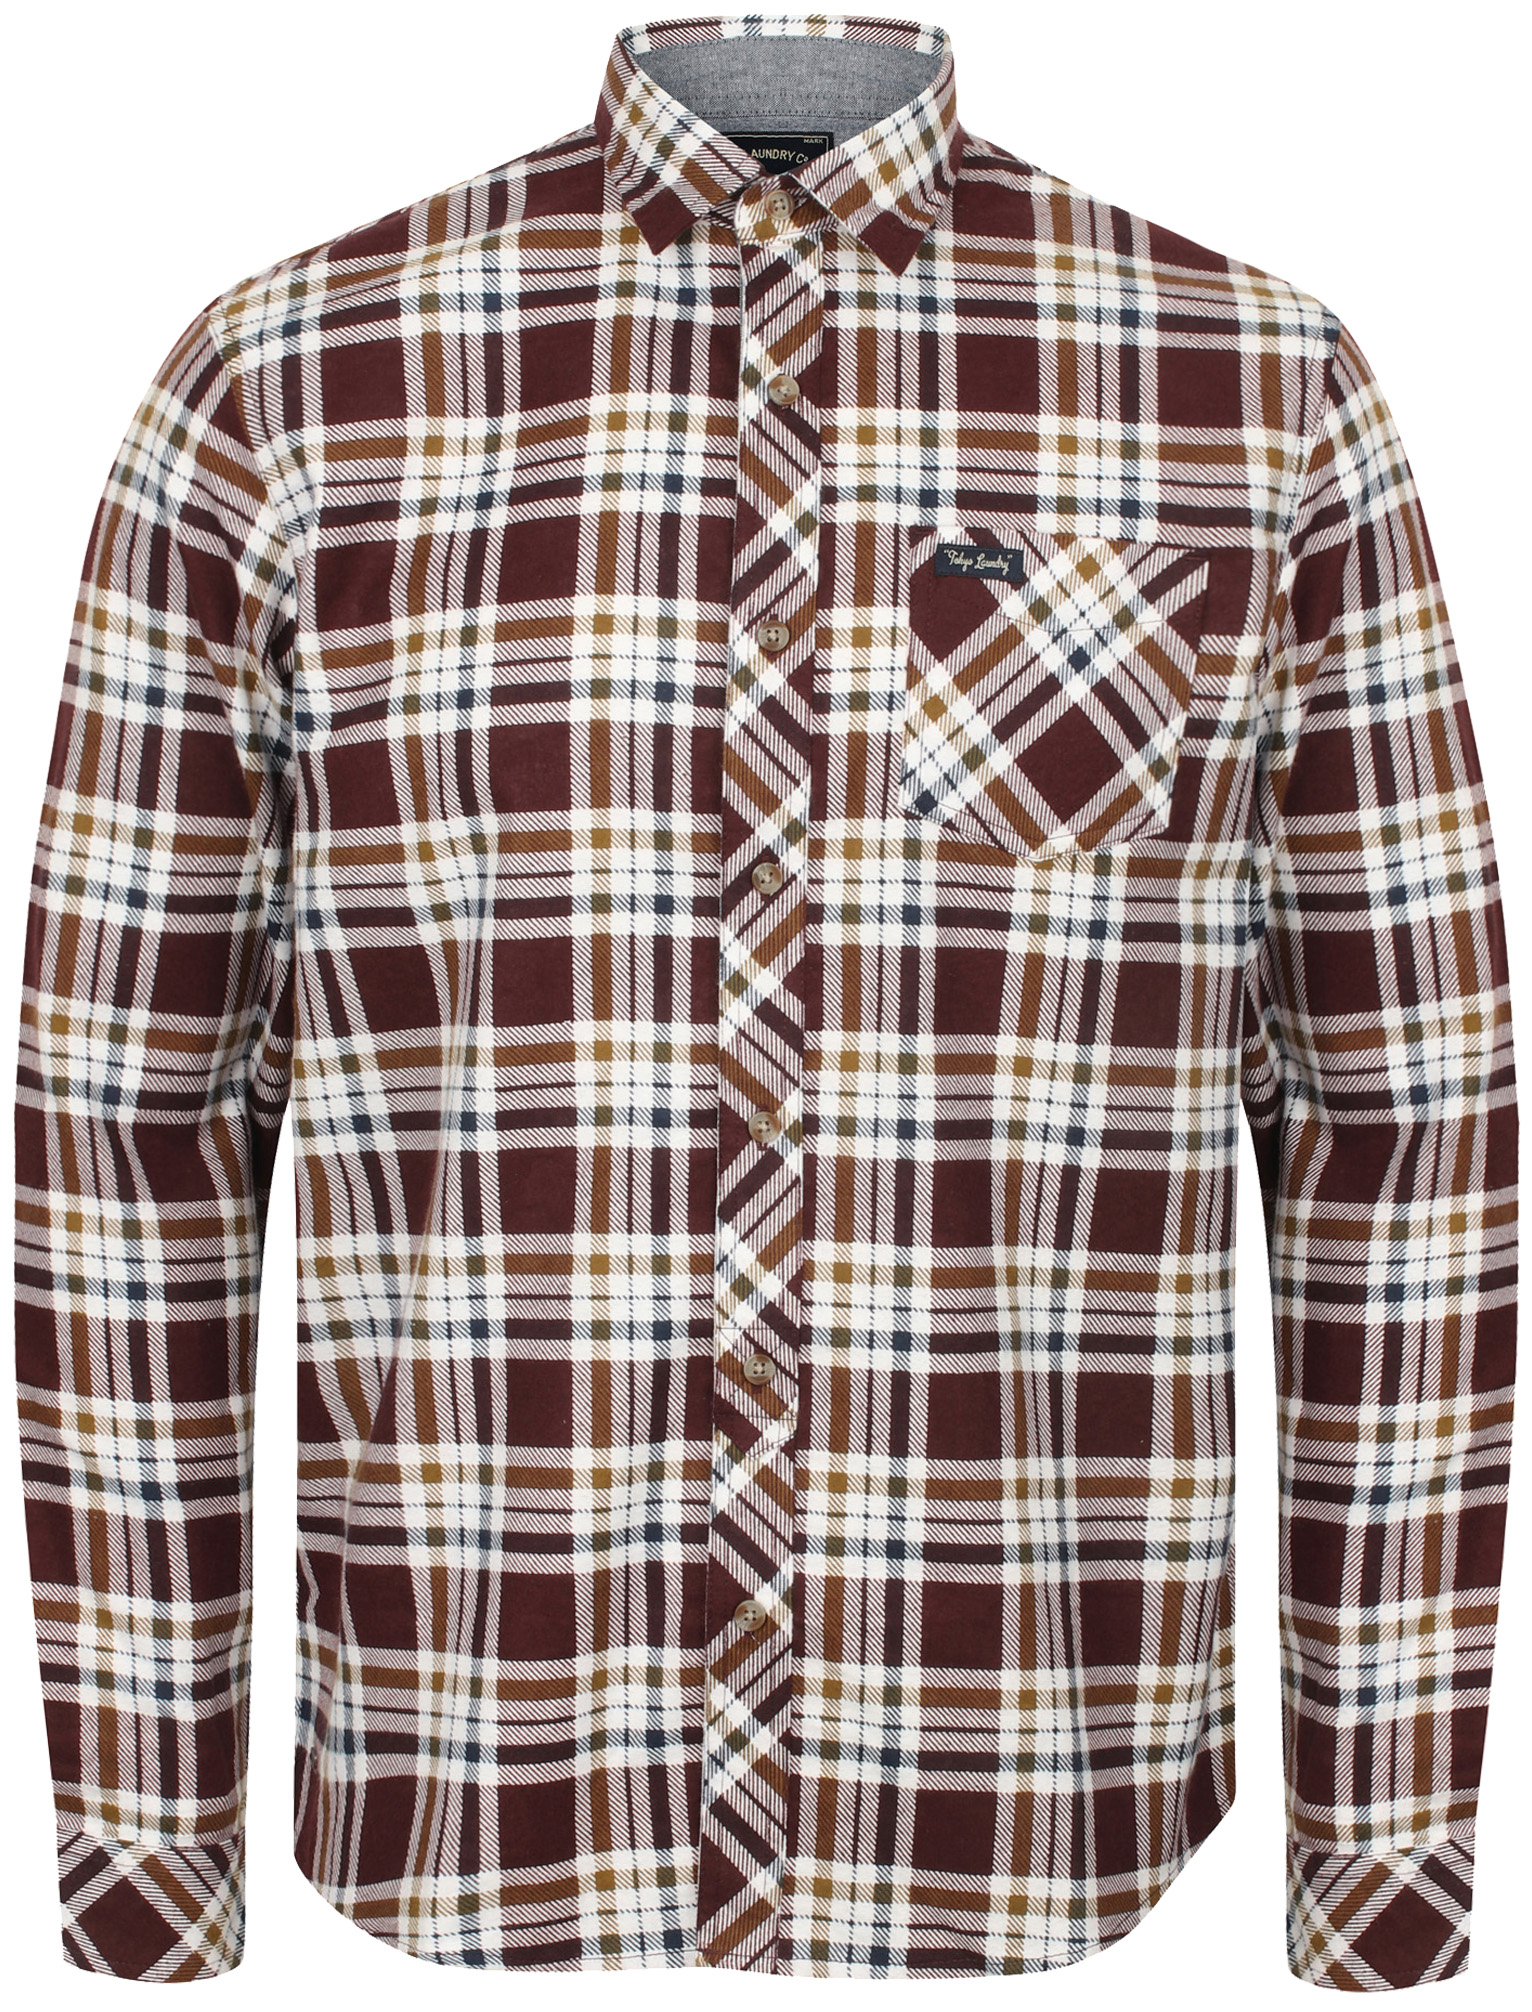 New Mens Tokyo Laundry Peven Long Sleeve Checked Button Up Shirt Top Size S-XXL 